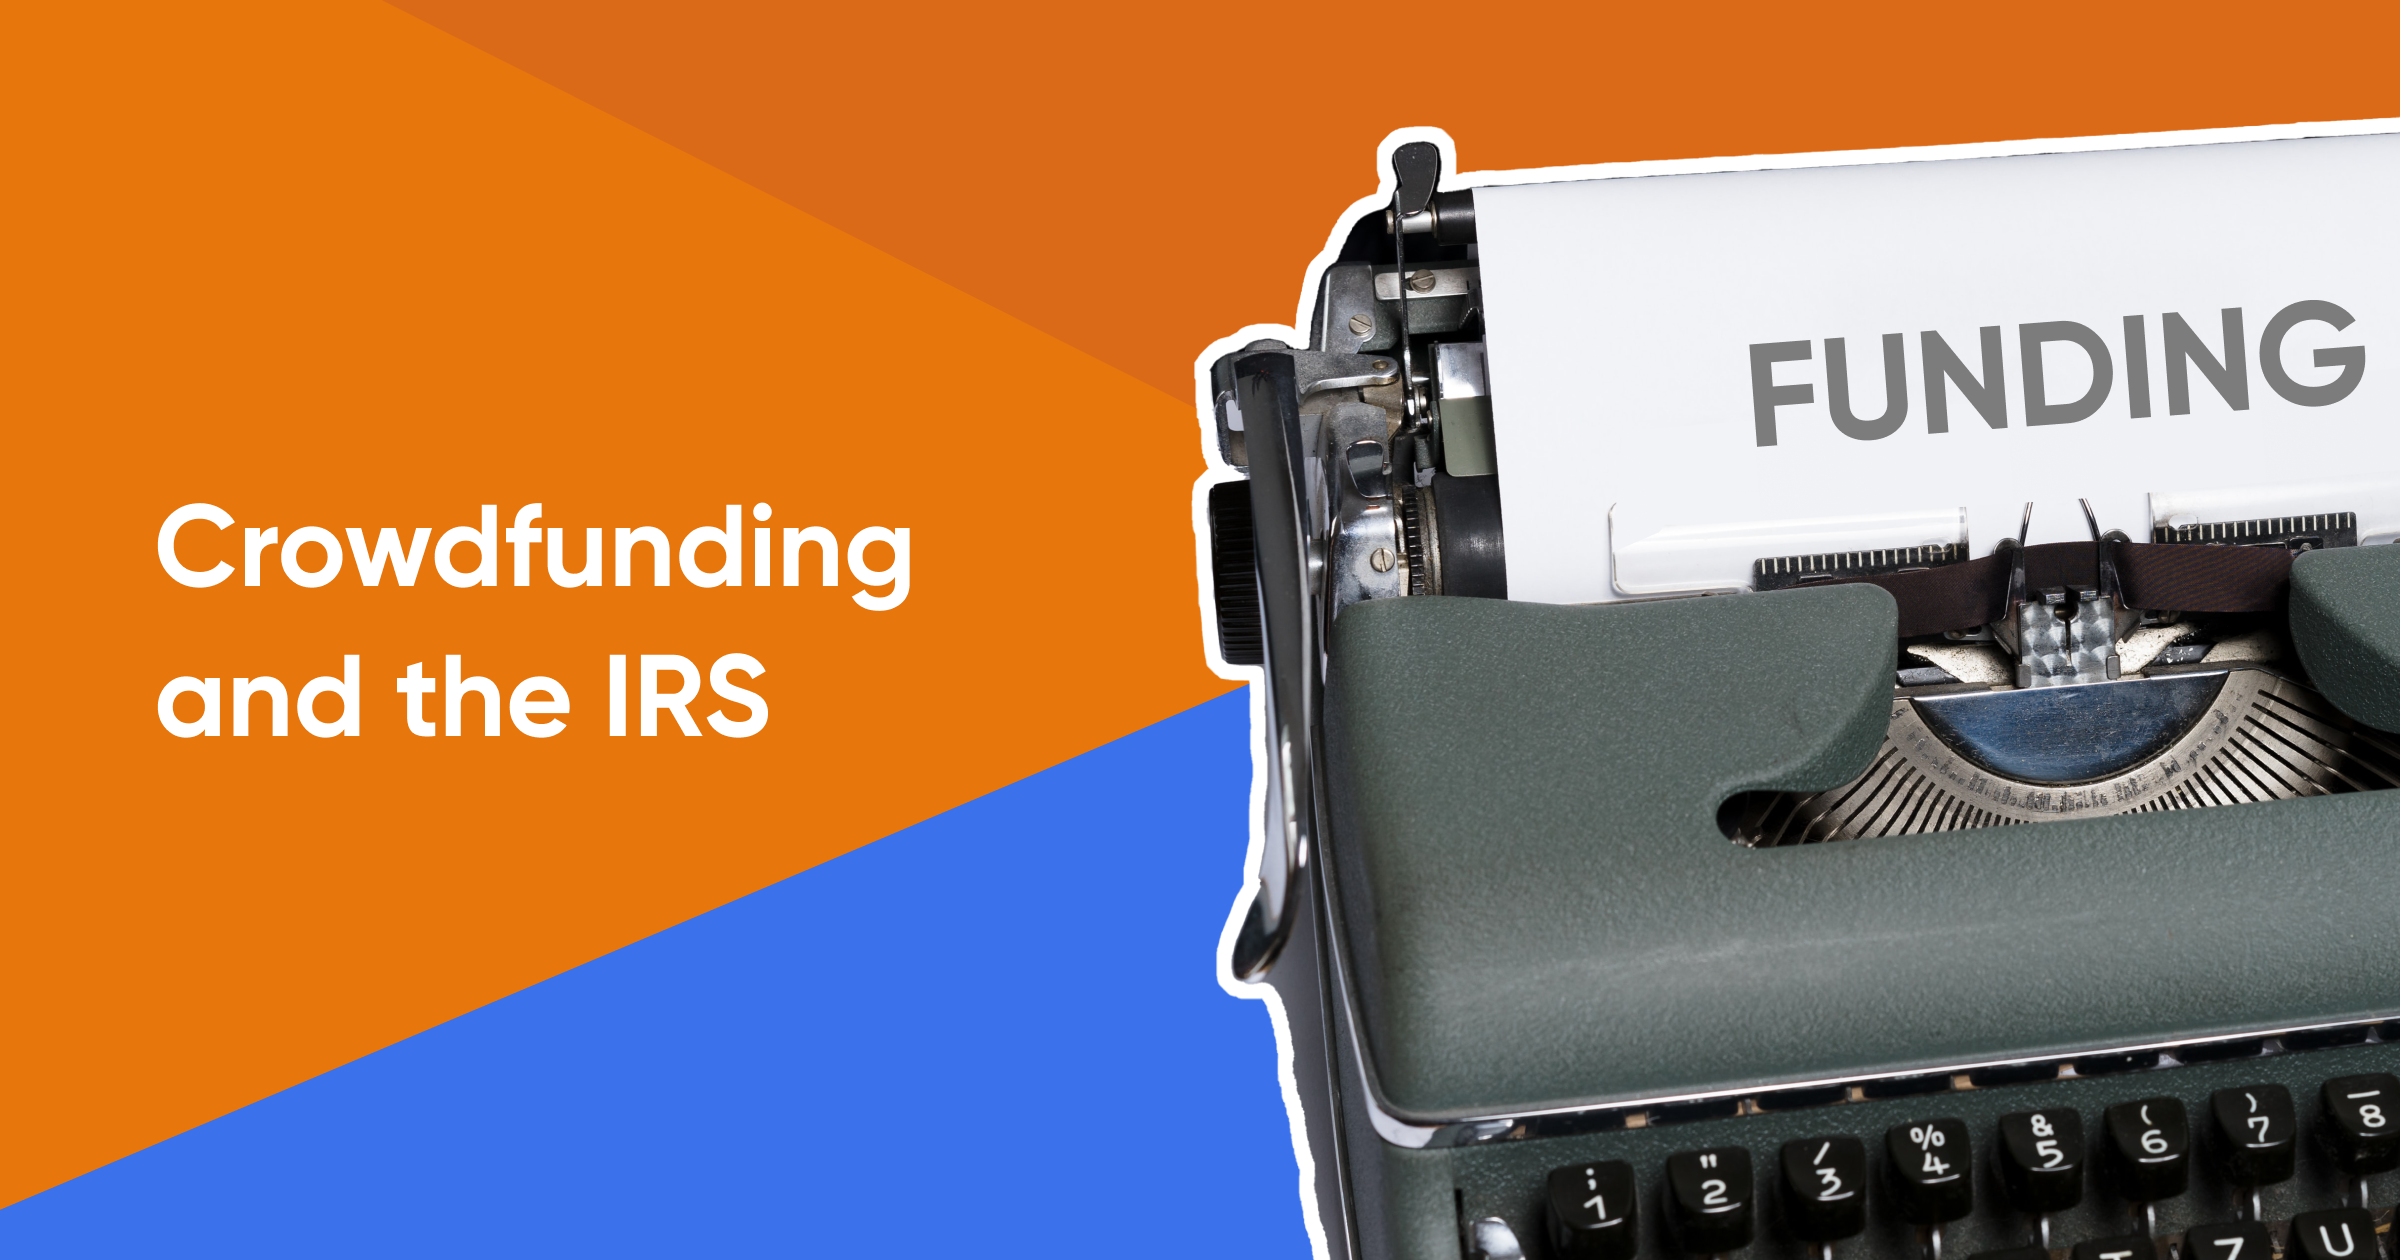 Crowdfunding and the IRS